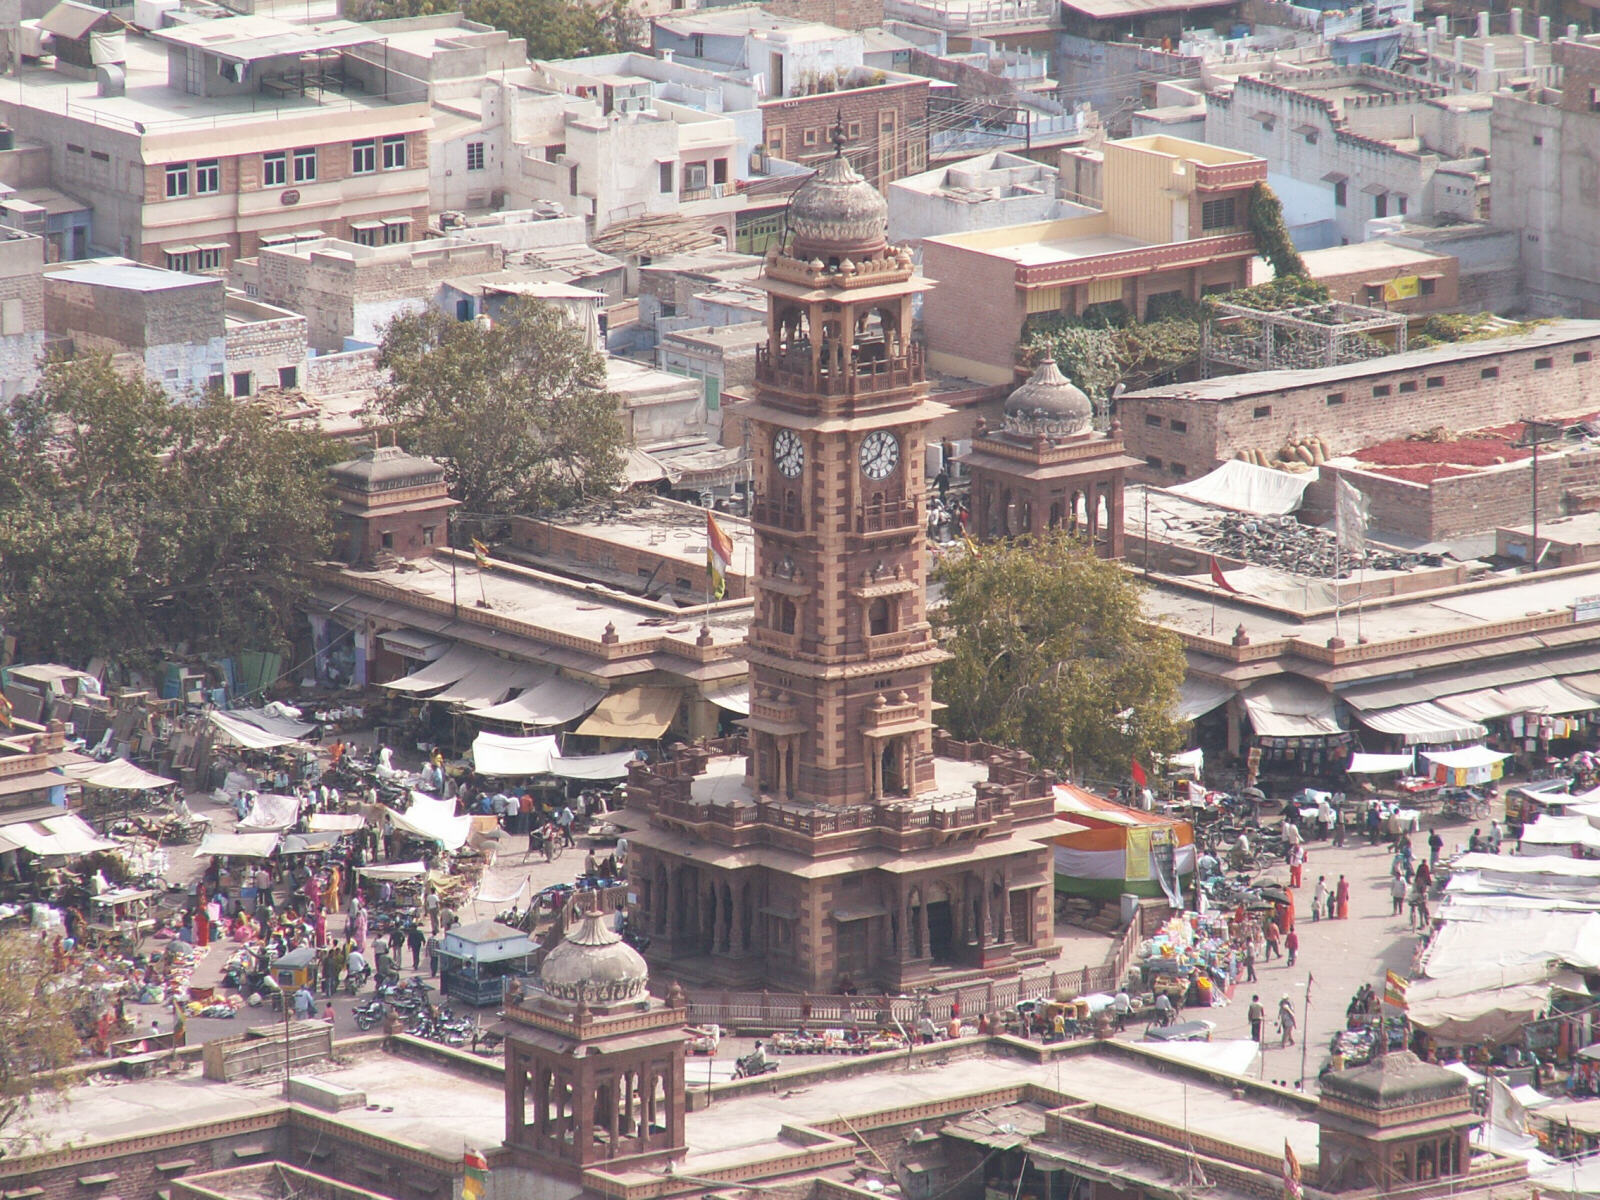 View of the clock tower from the fort in Jodhpur, Rajasthan